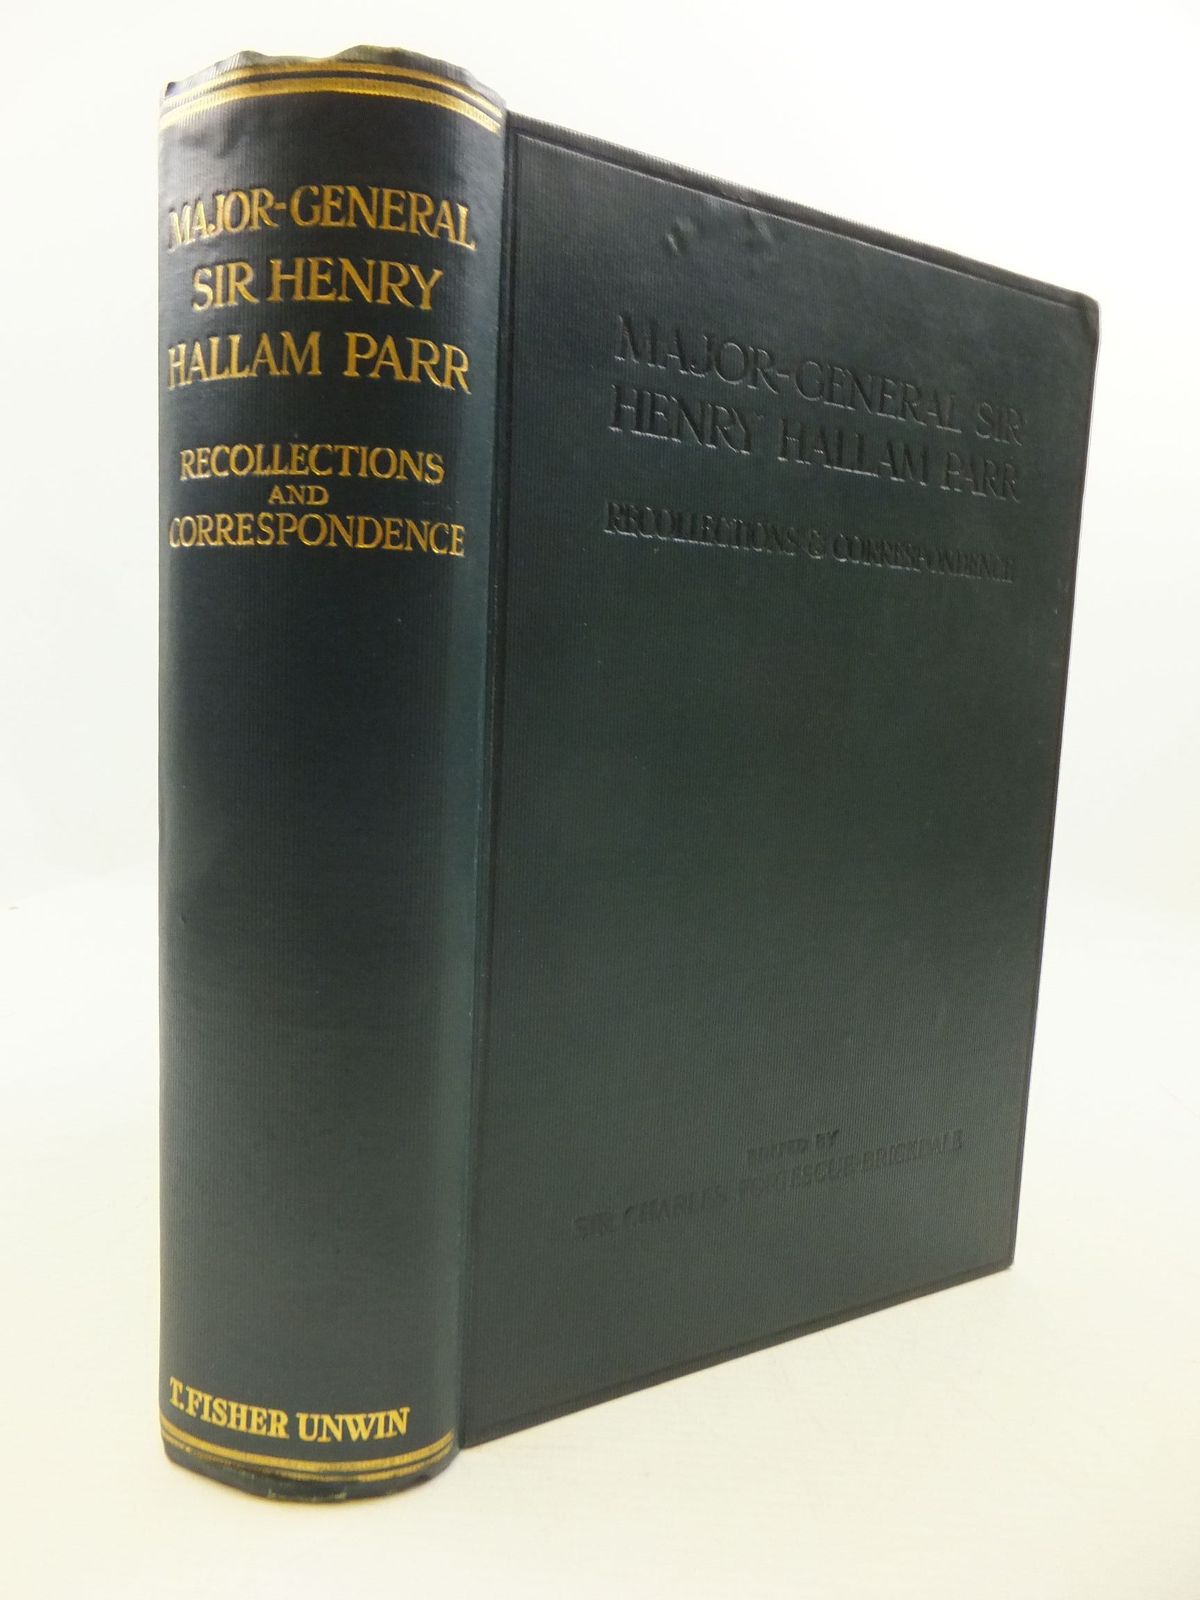 Photo of MAJOR-GENERAL SIR HENRY HALLAM PARR written by Fortescue-Brickdale, Charles published by T. Fisher Unwin Ltd. (STOCK CODE: 2111037)  for sale by Stella & Rose's Books